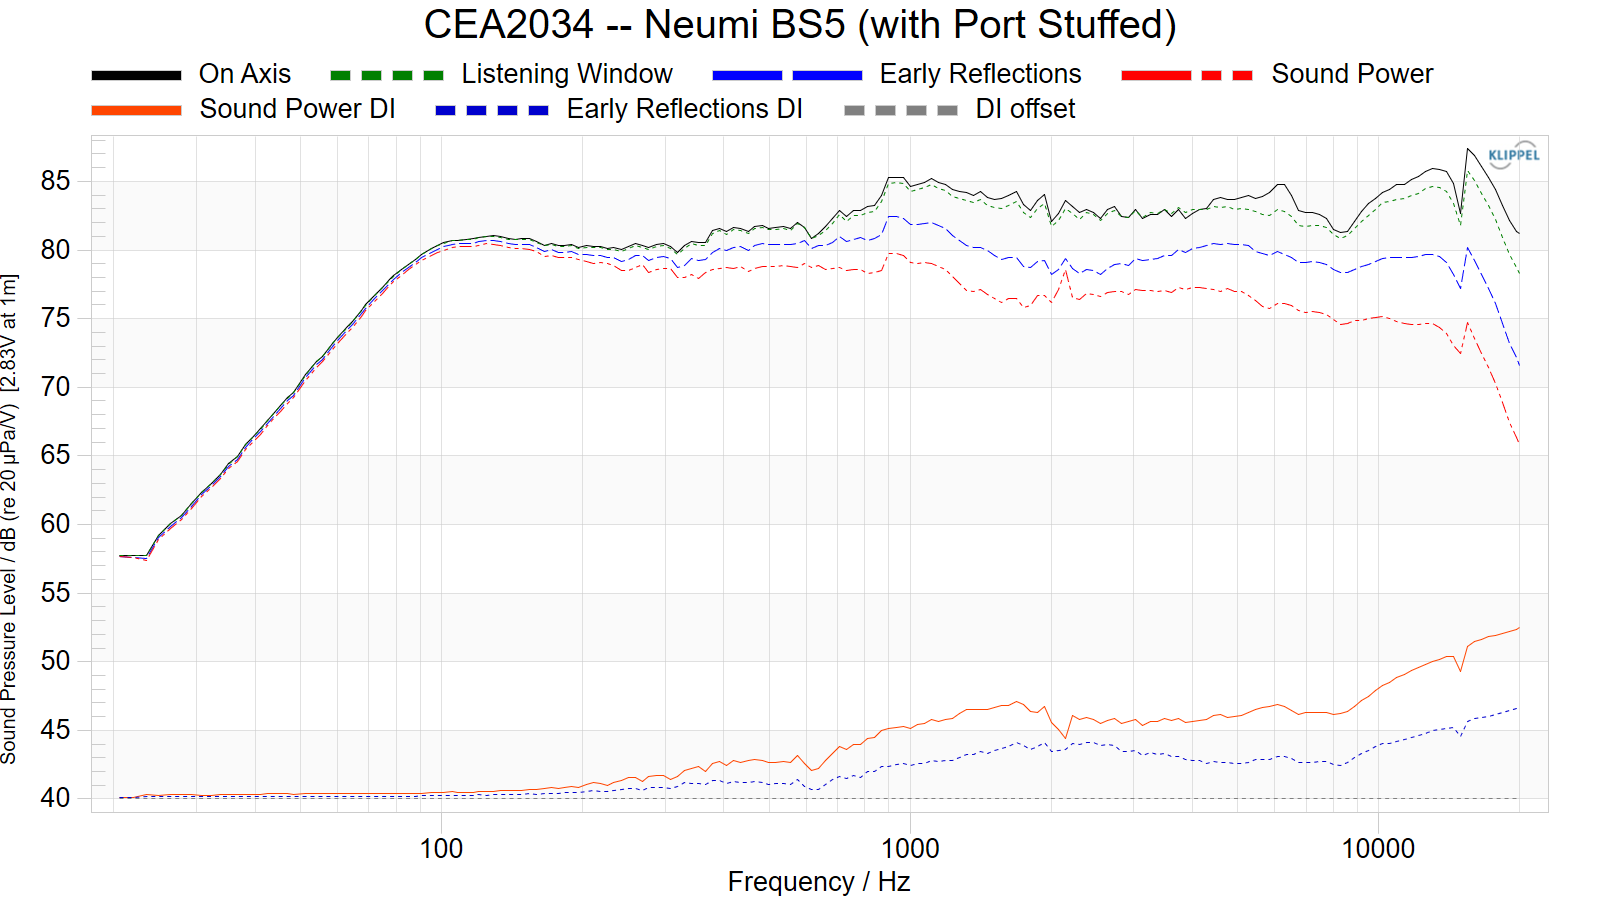 CEA2034%20--%20Neumi%20BS5%20%28with%20Port%20Stuffed%29.png